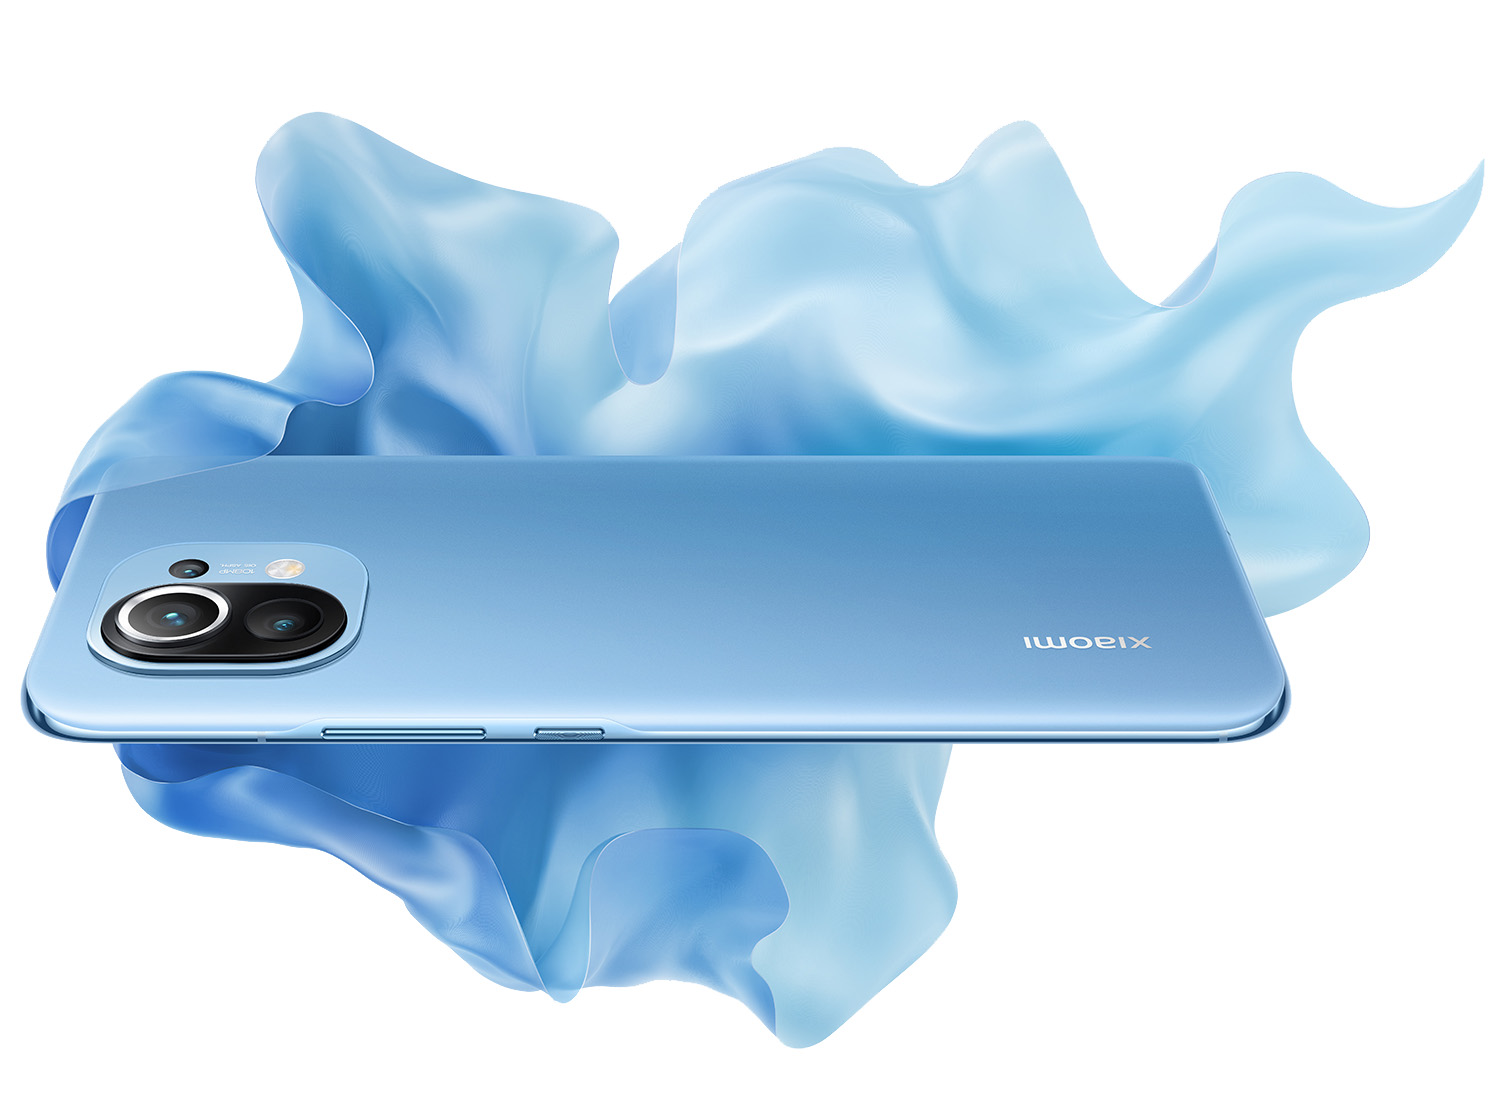 Oppo Reno 6 Pro 5G on sale from today, check price and rivals, iQOO 7  Legend, Mi 11X Pro, Samsung Galaxy S20 FE